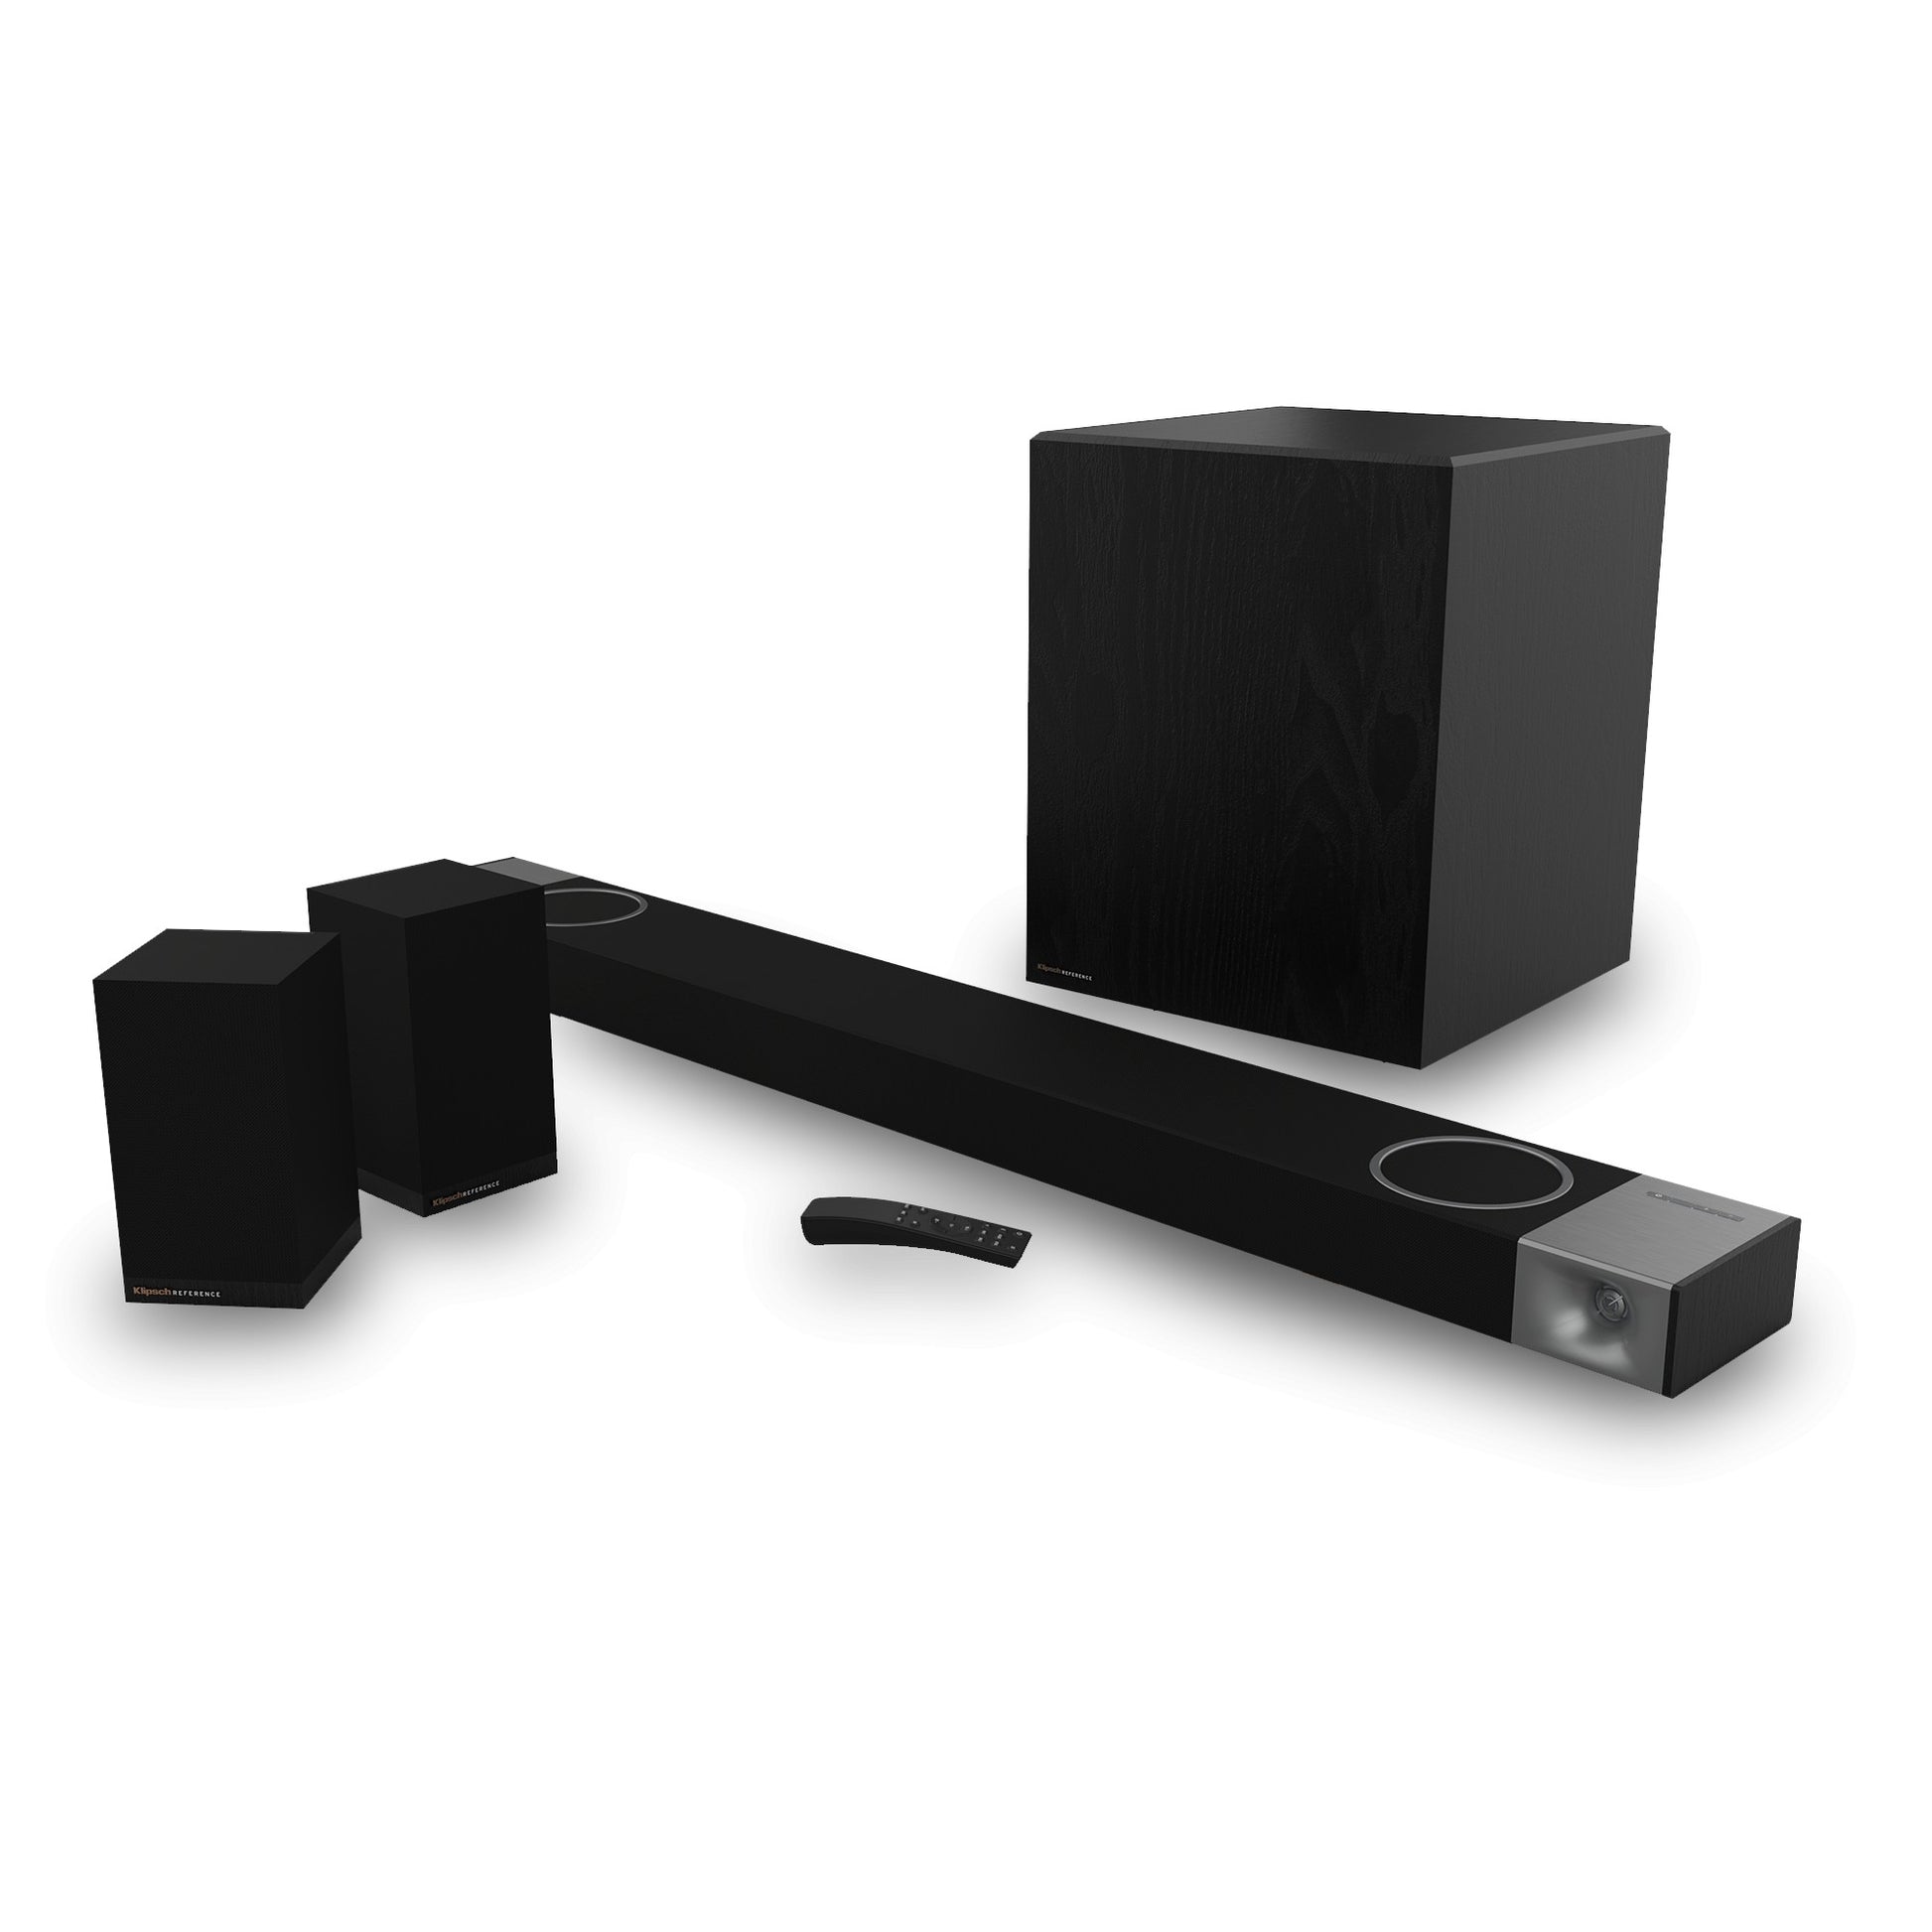  Klipsch RP-8060FA 7.1.4 Dolby Atmos Home Theater System - Ebony  : Electronics